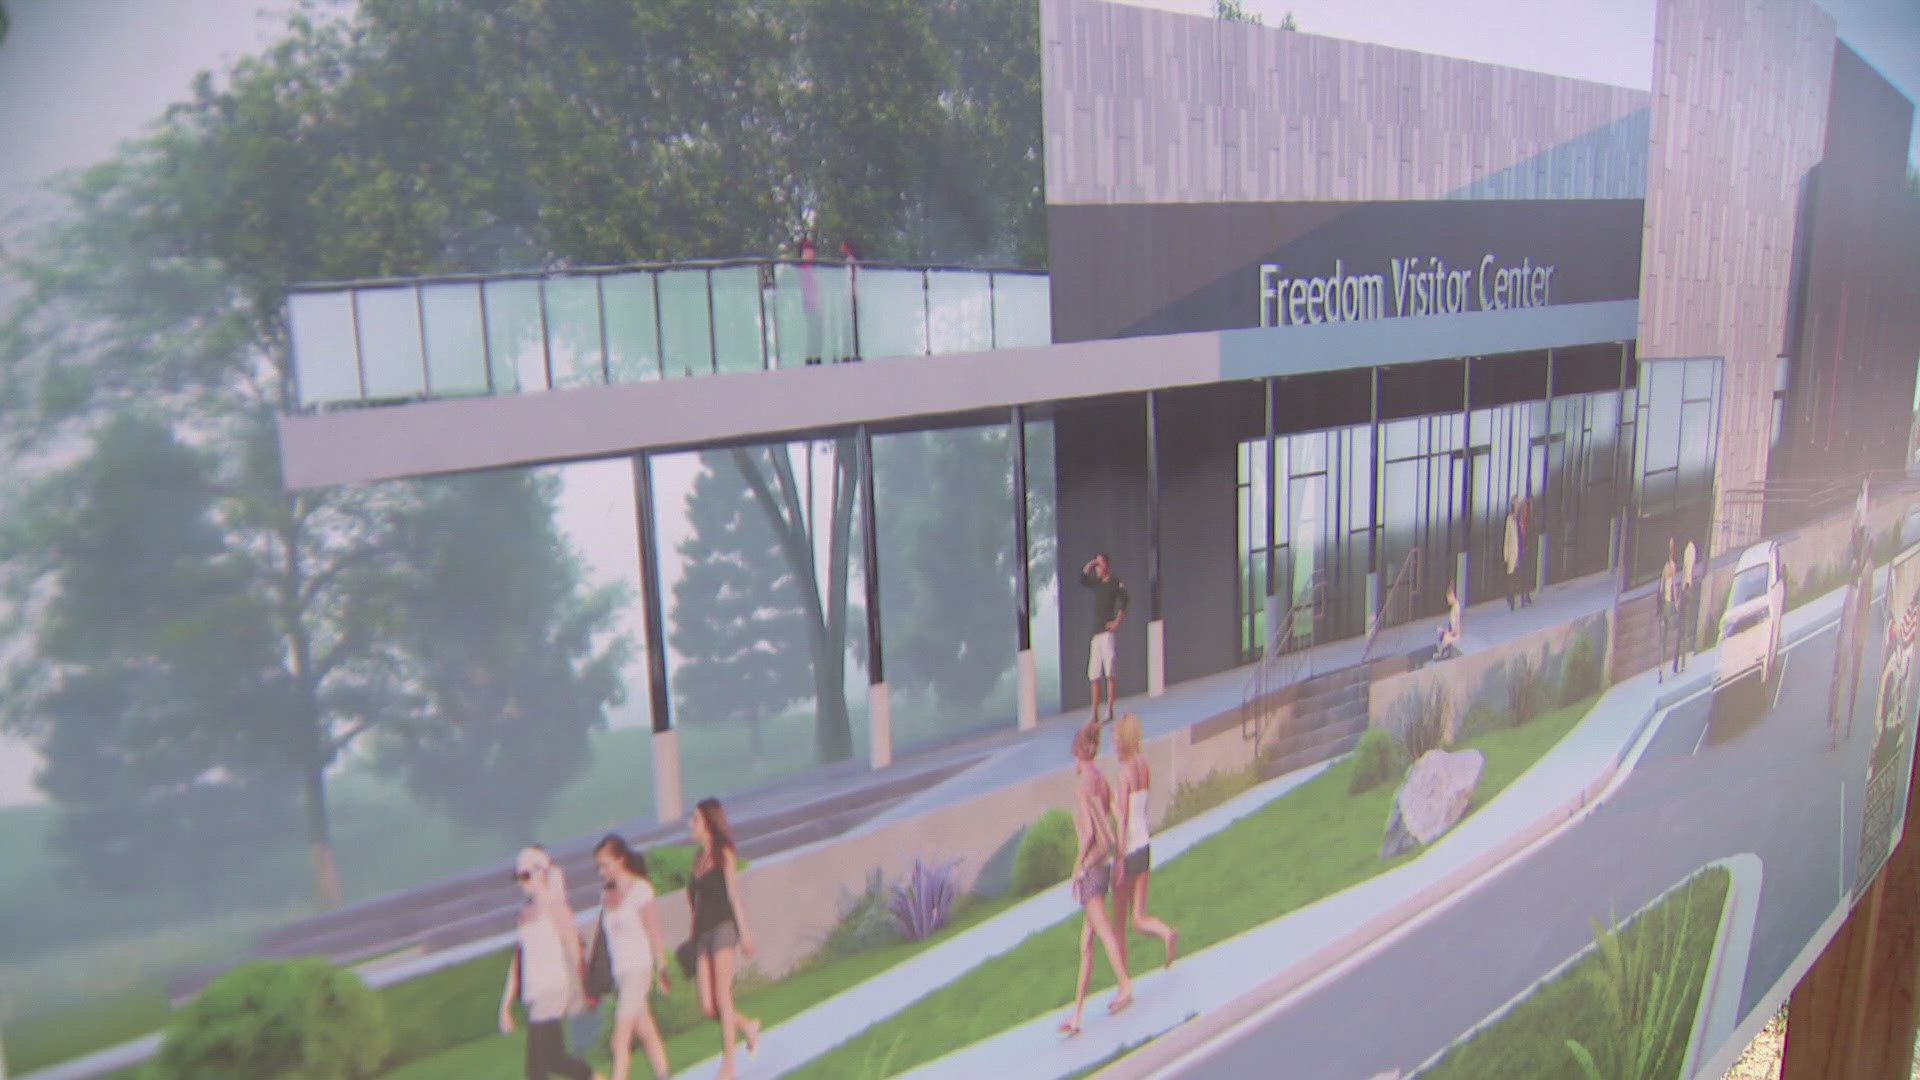 Details have been released on a new $8 million Education and Visitor Center.